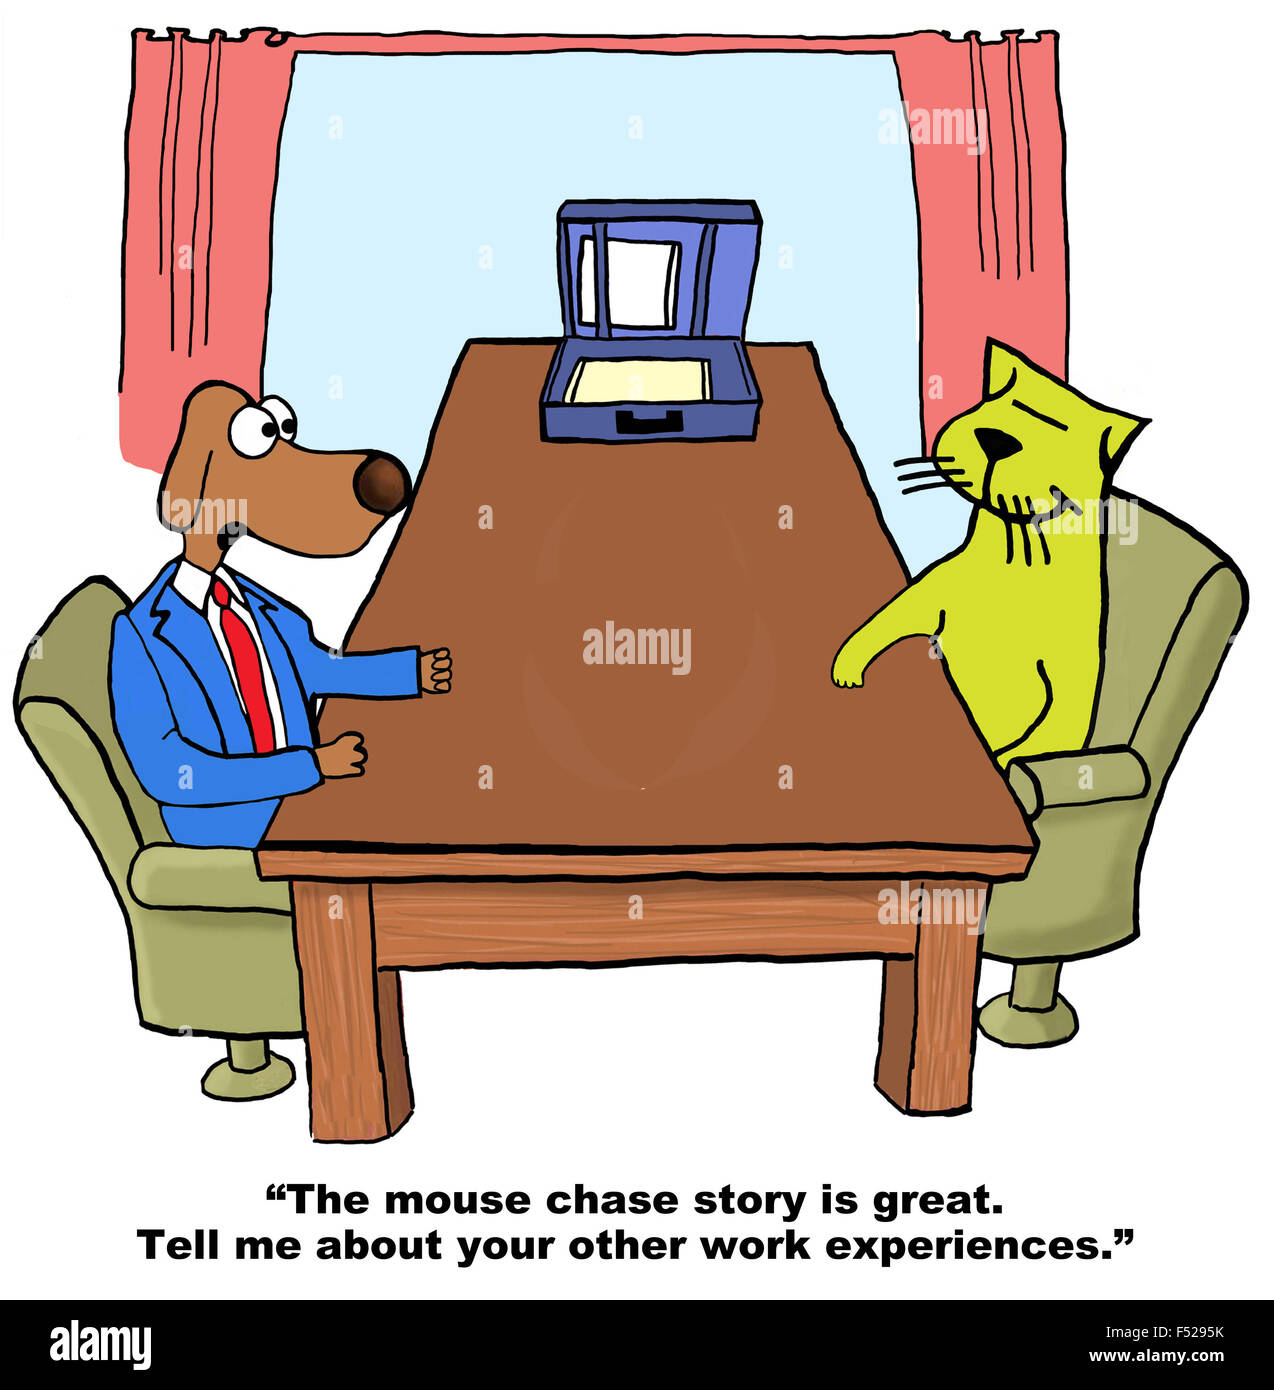 Business cartoon of dog interviewer saying to job candidate cat, 'The mouse chase story is great... other work experiences'. Stock Photo